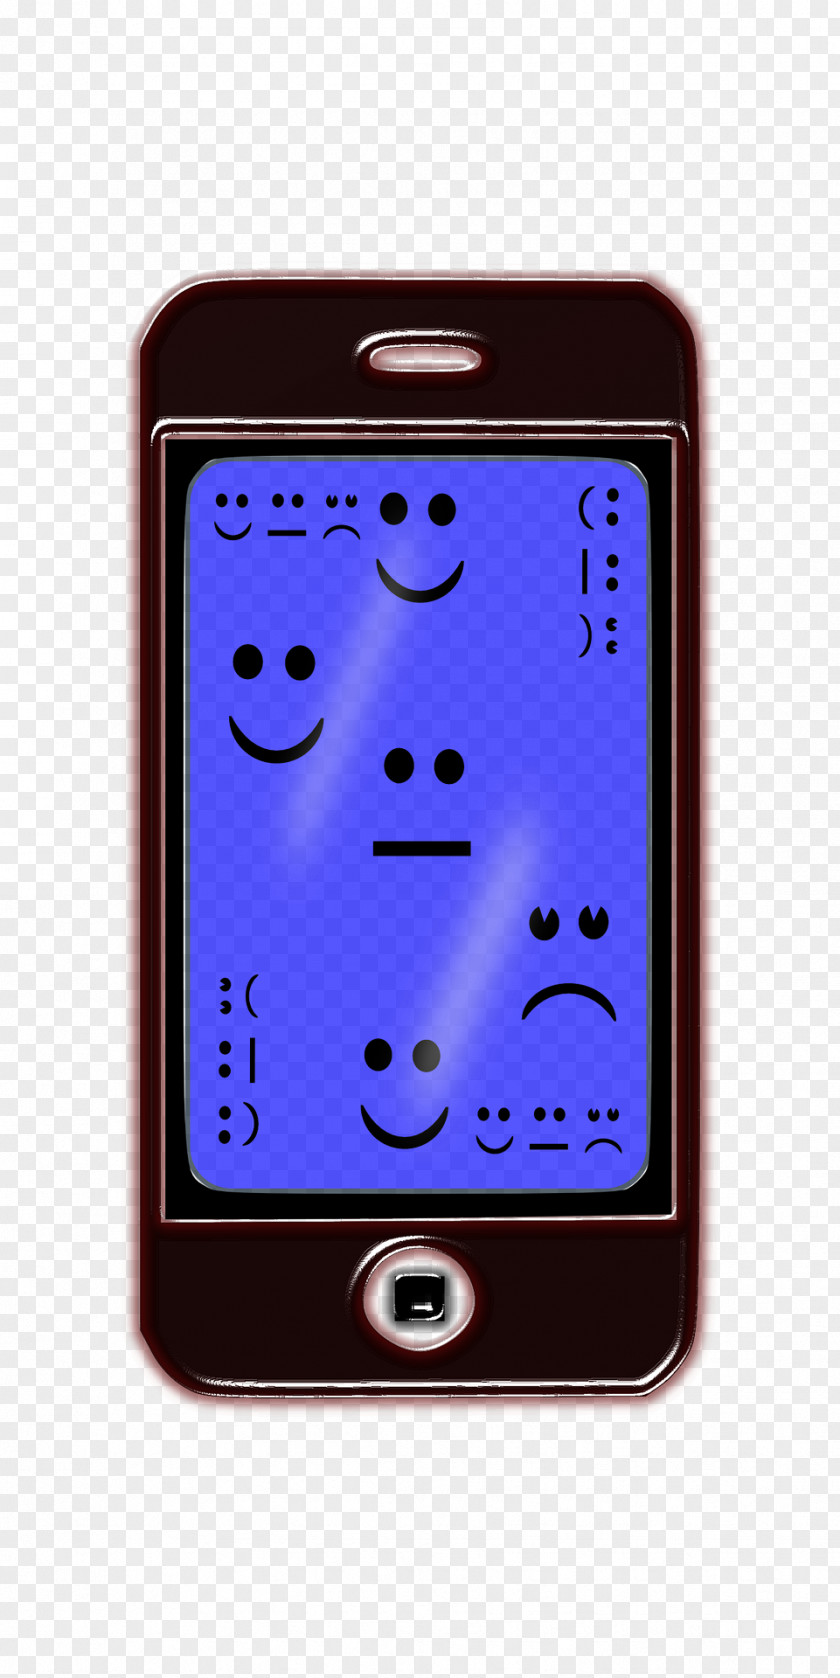 Expression Phone Feature Telephone Mobile Technology Illustration PNG